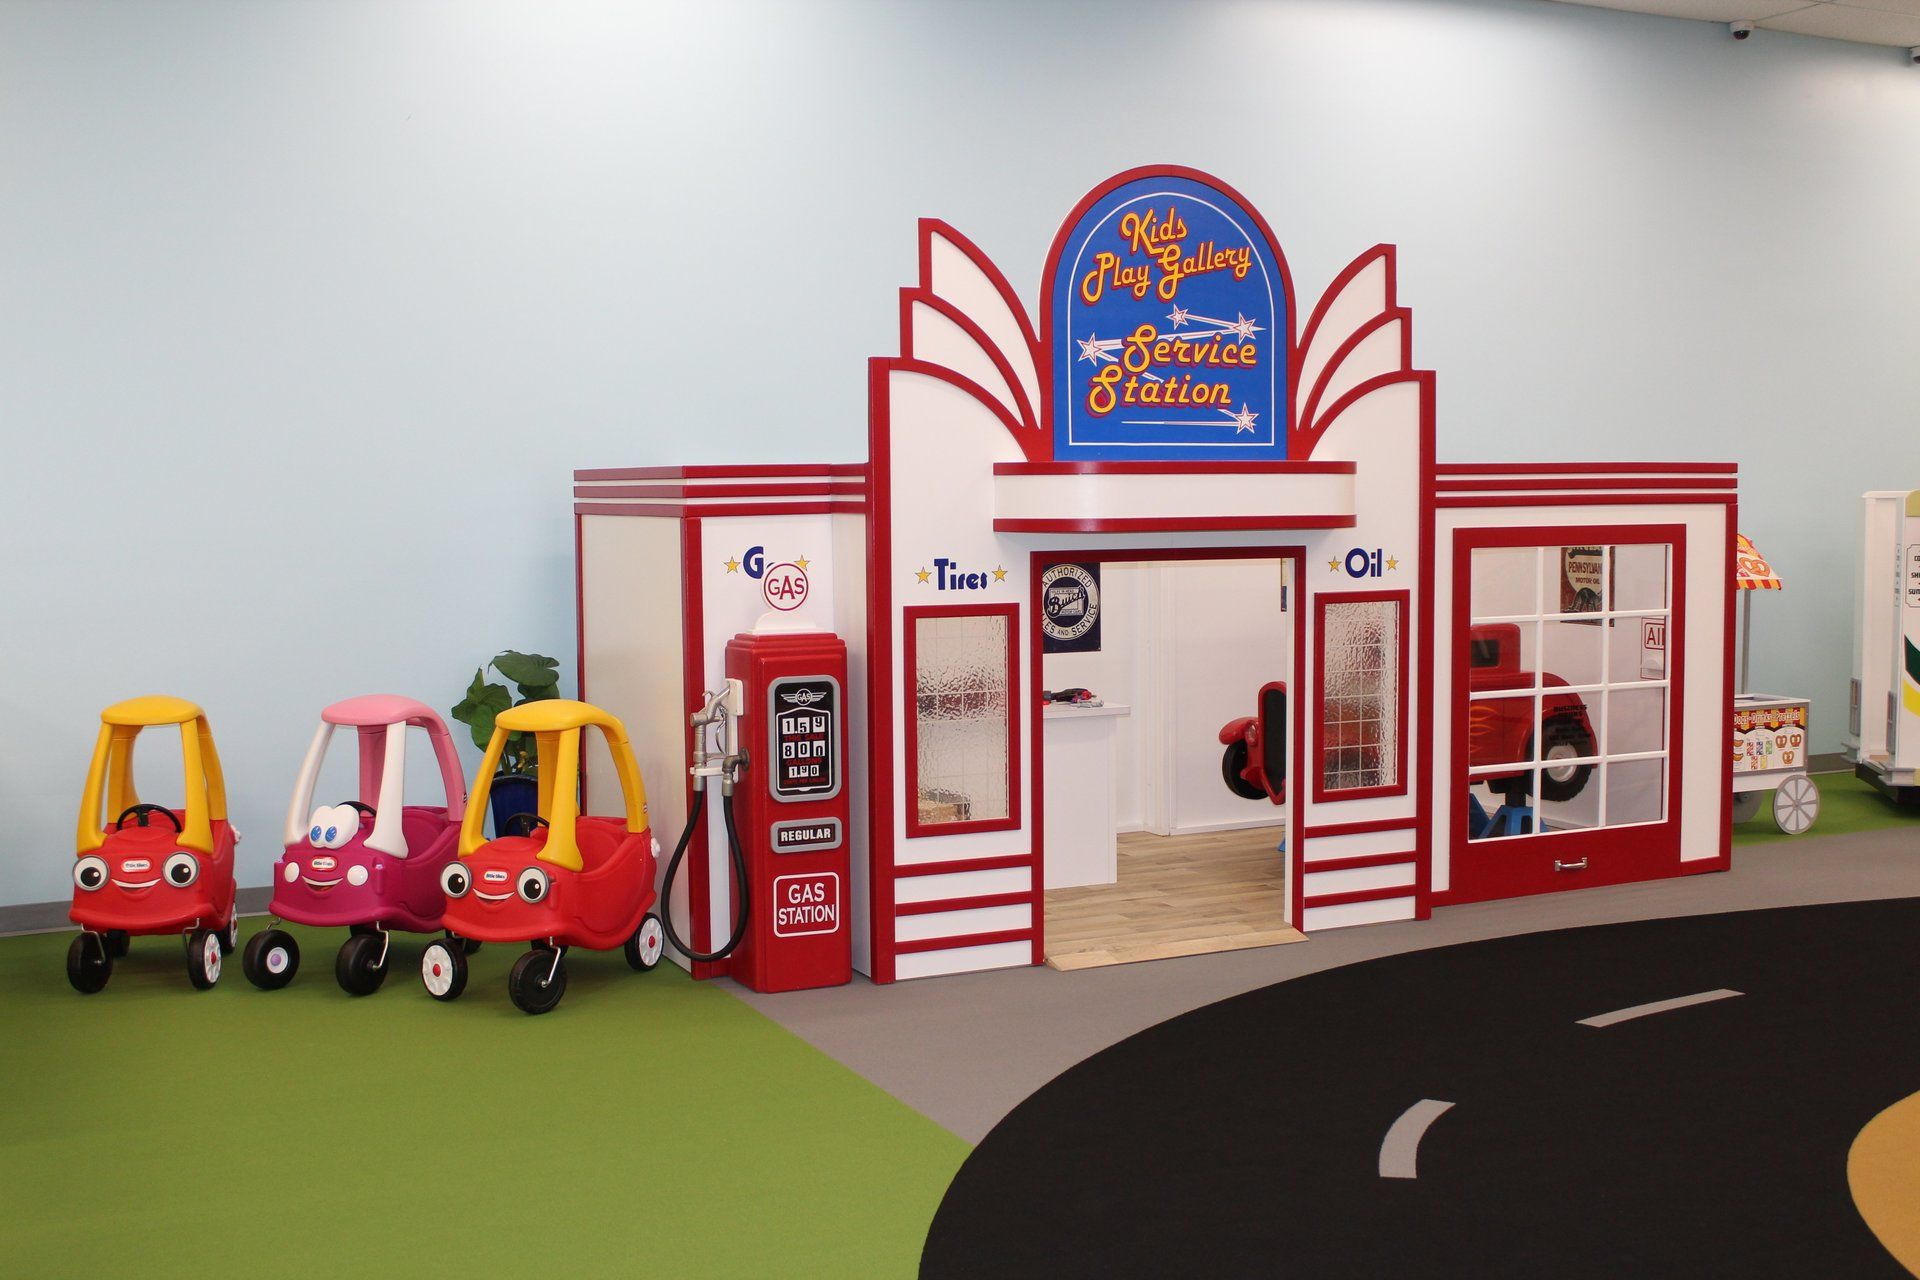 Kids Play Gallery Service Station